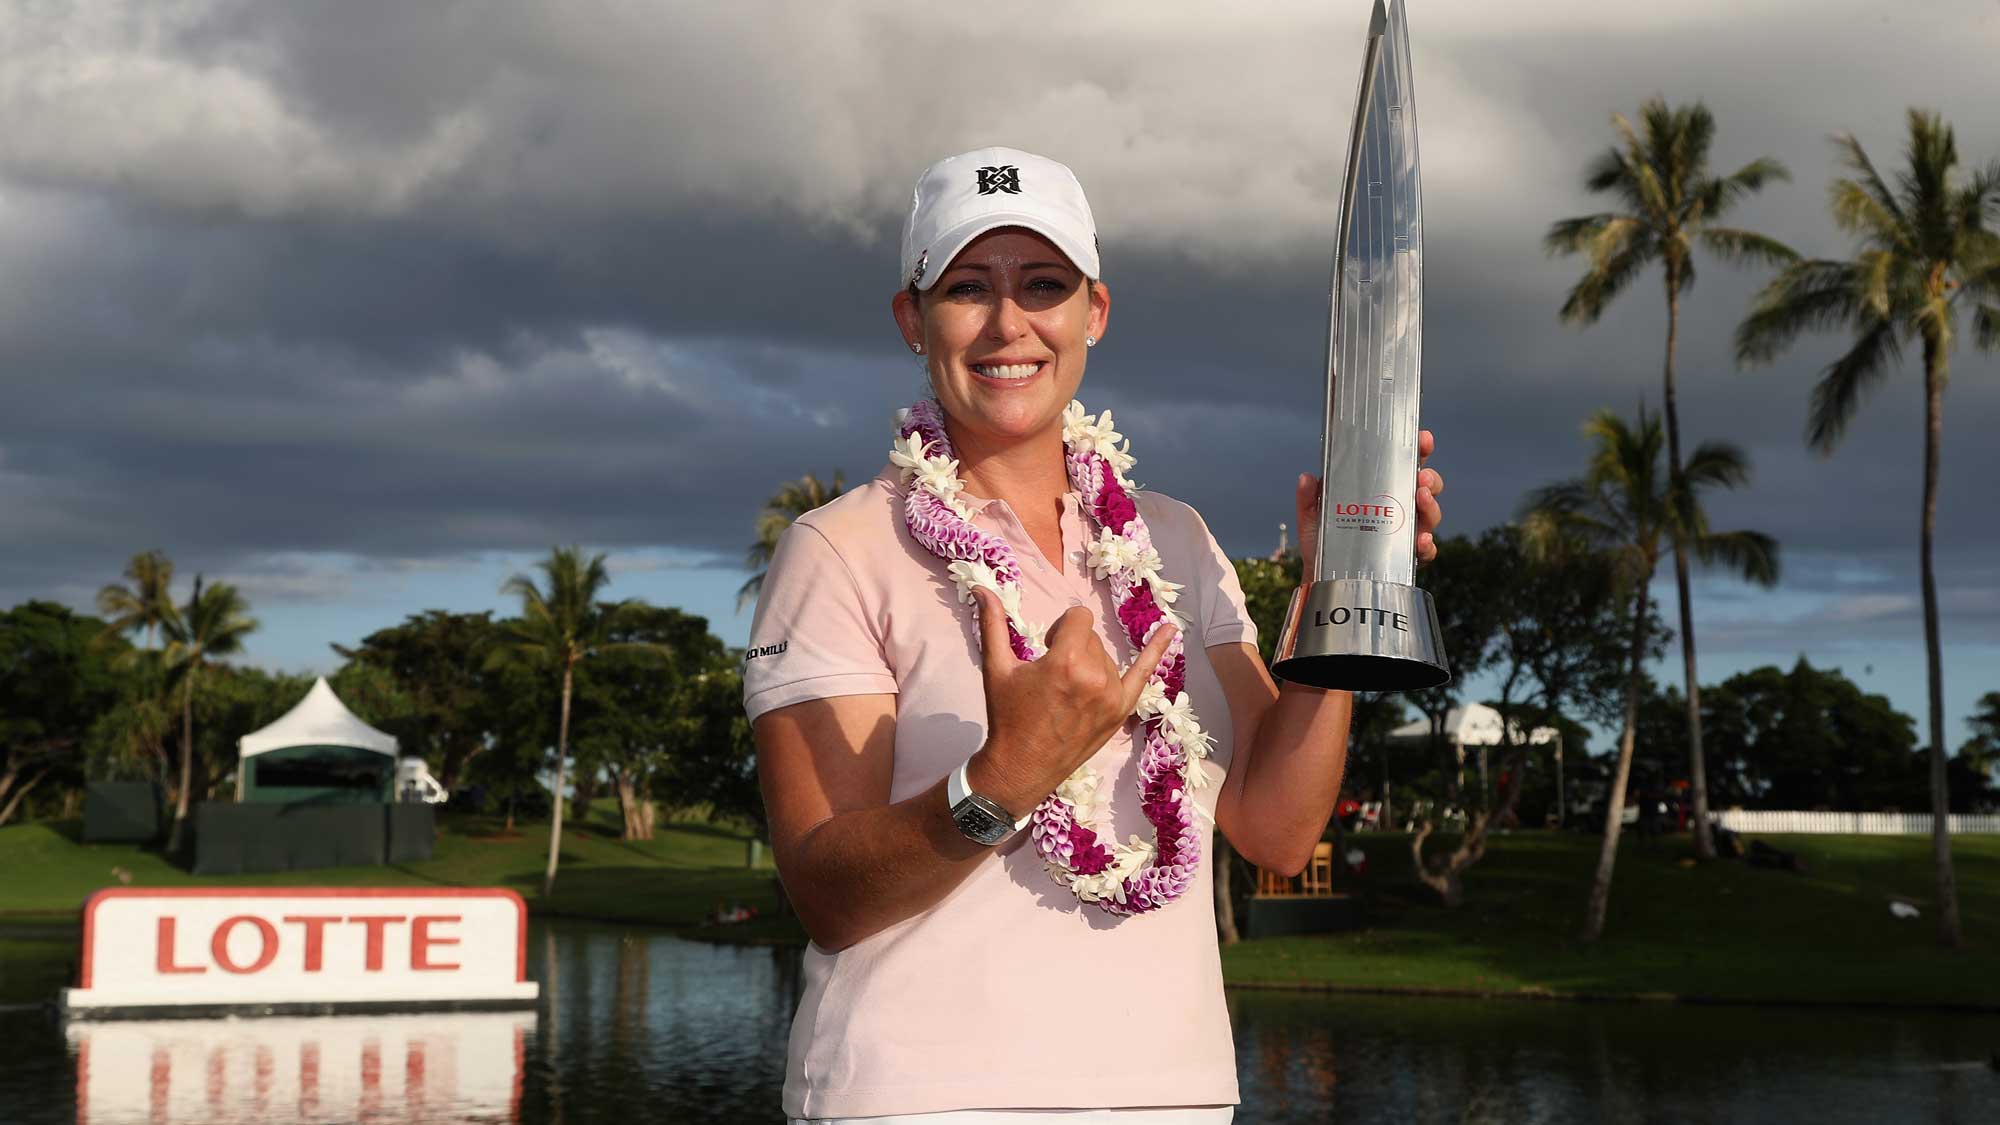 Cristie Kerr poses with the trophy after winning in the final round of the LPGA LOTTE Championship Presented By Hershey